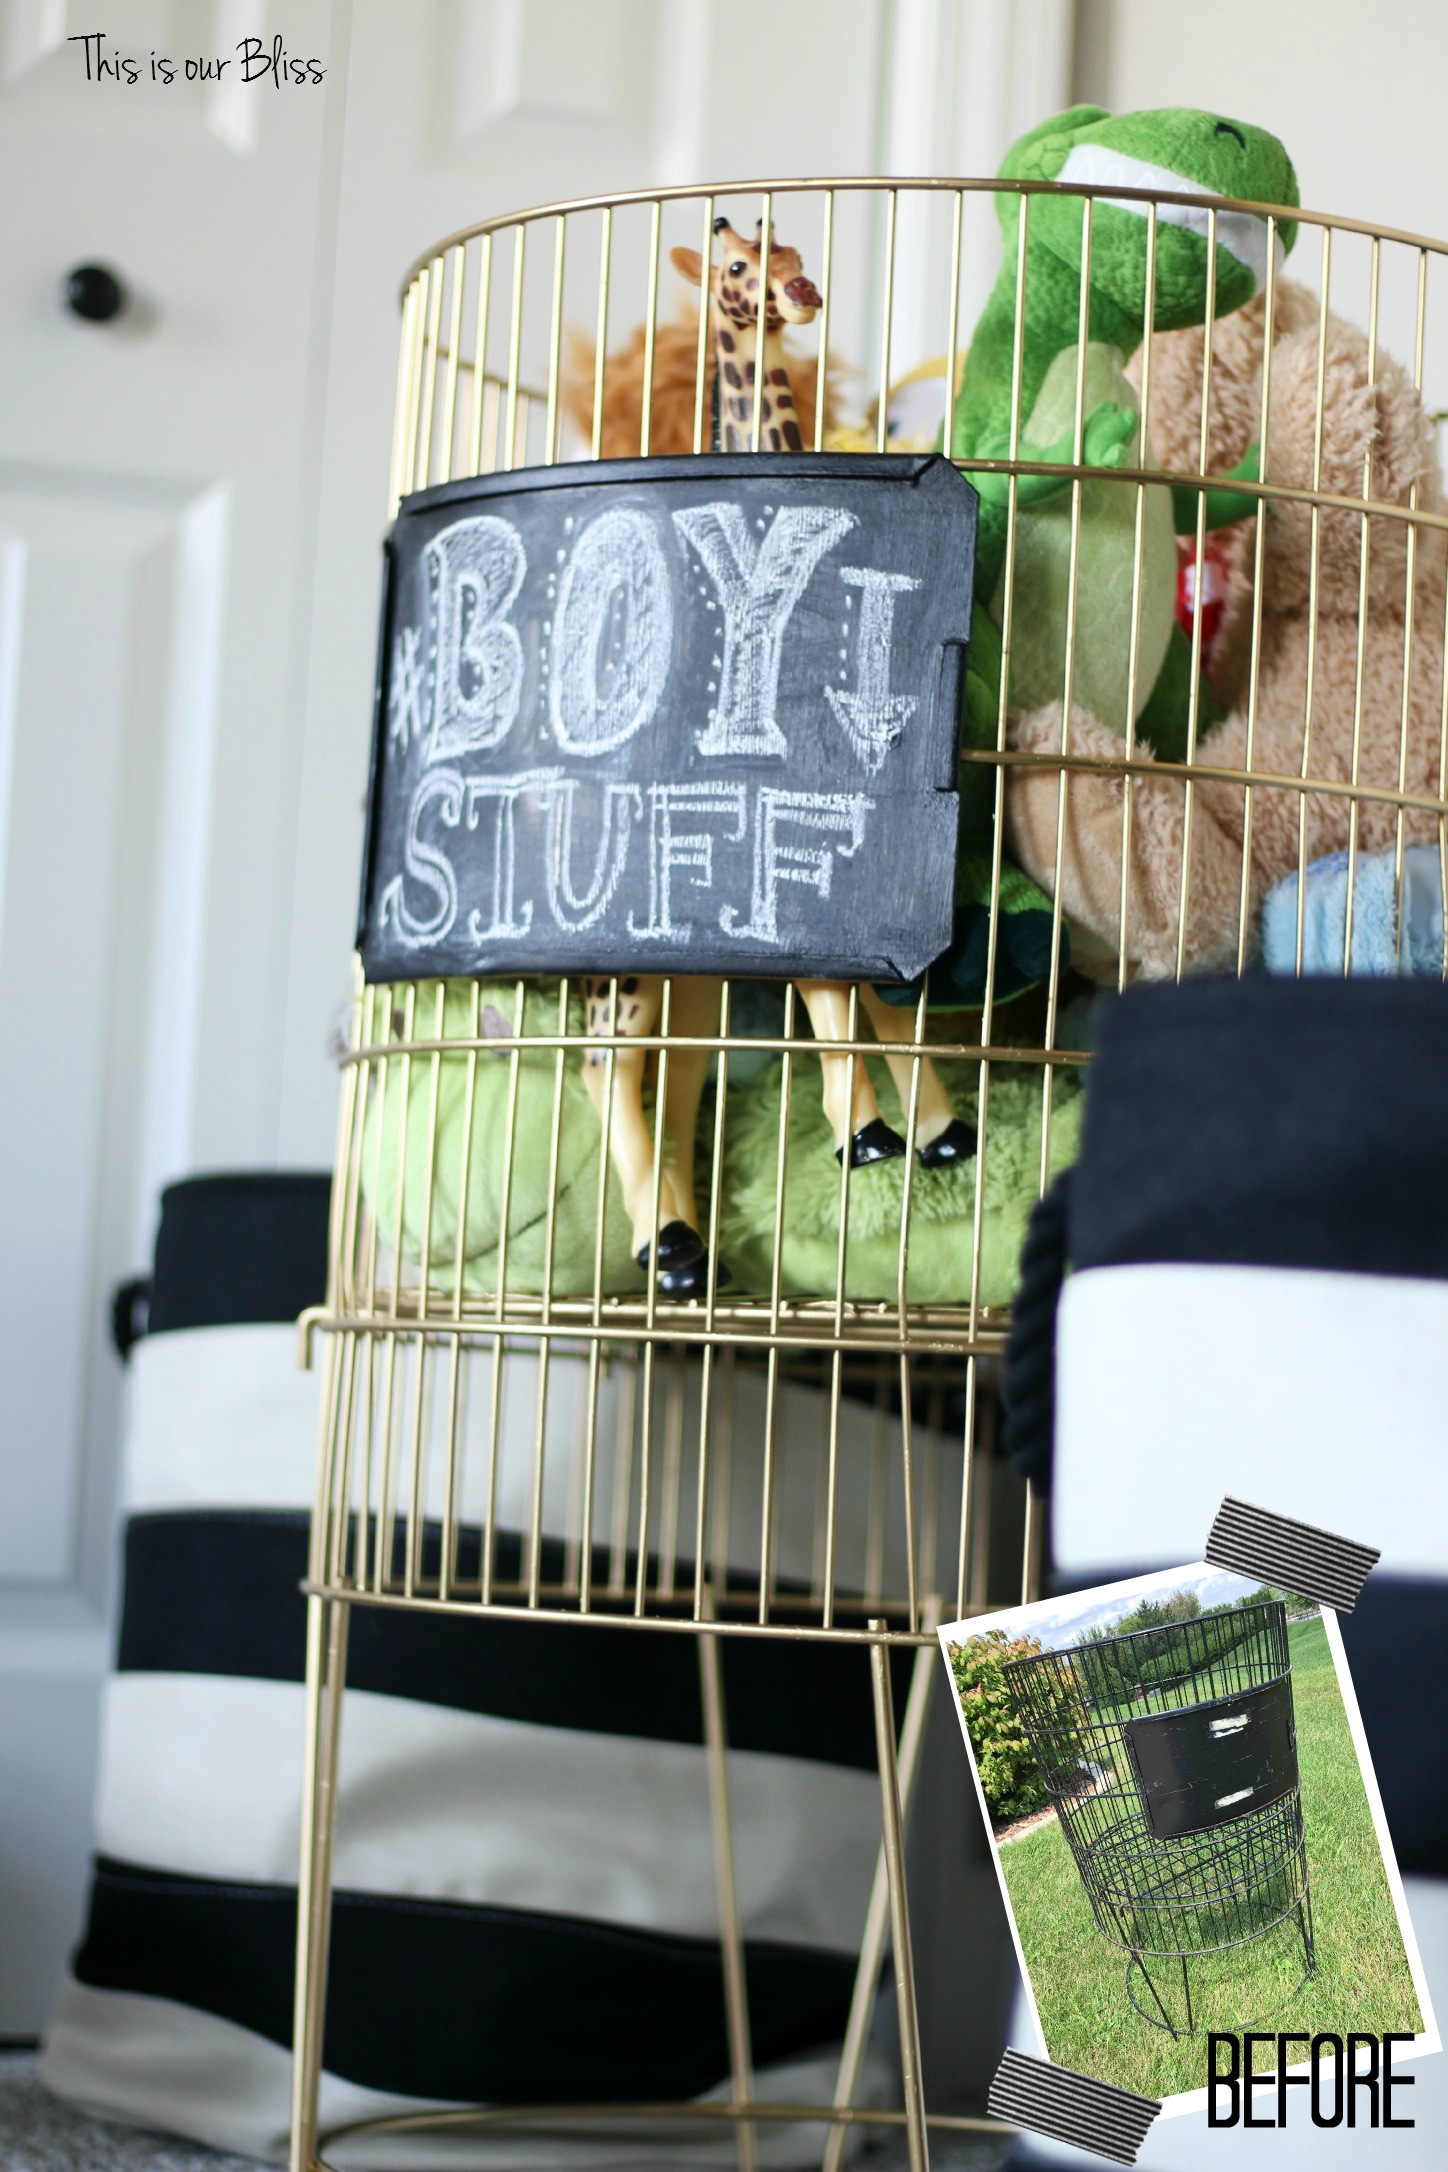 Before & after DIY metal toy bin gold spray paint & chalkboard paint boy stuff playroom striped baskets 2 This is our Bliss